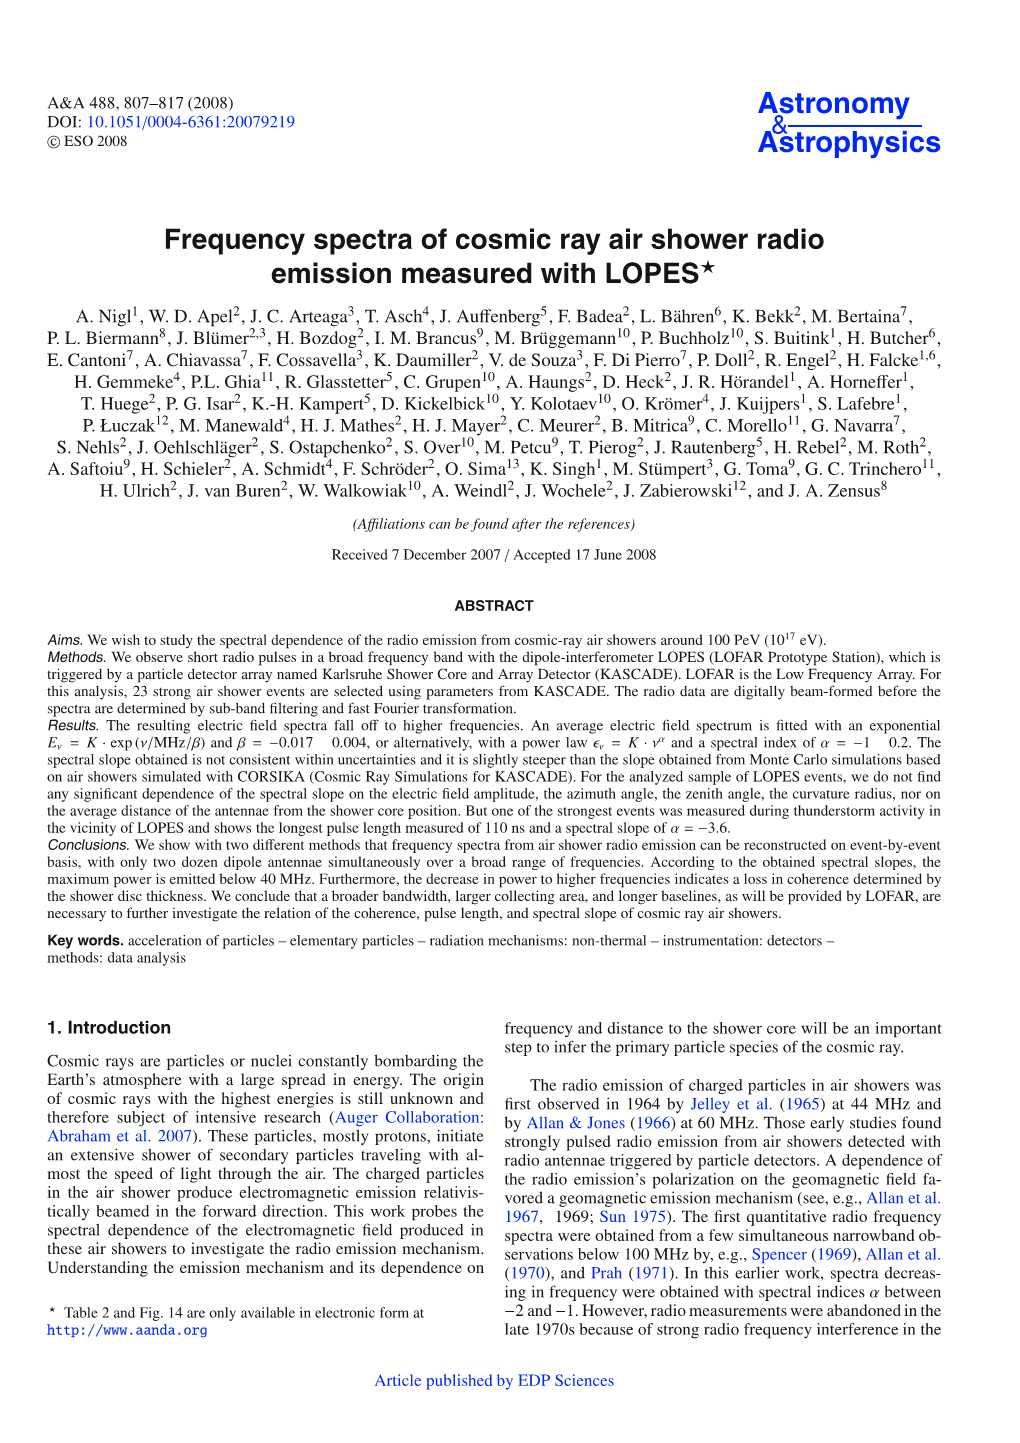 Frequency Spectra of Cosmic Ray Air Shower Radio Emission Measured with LOPES